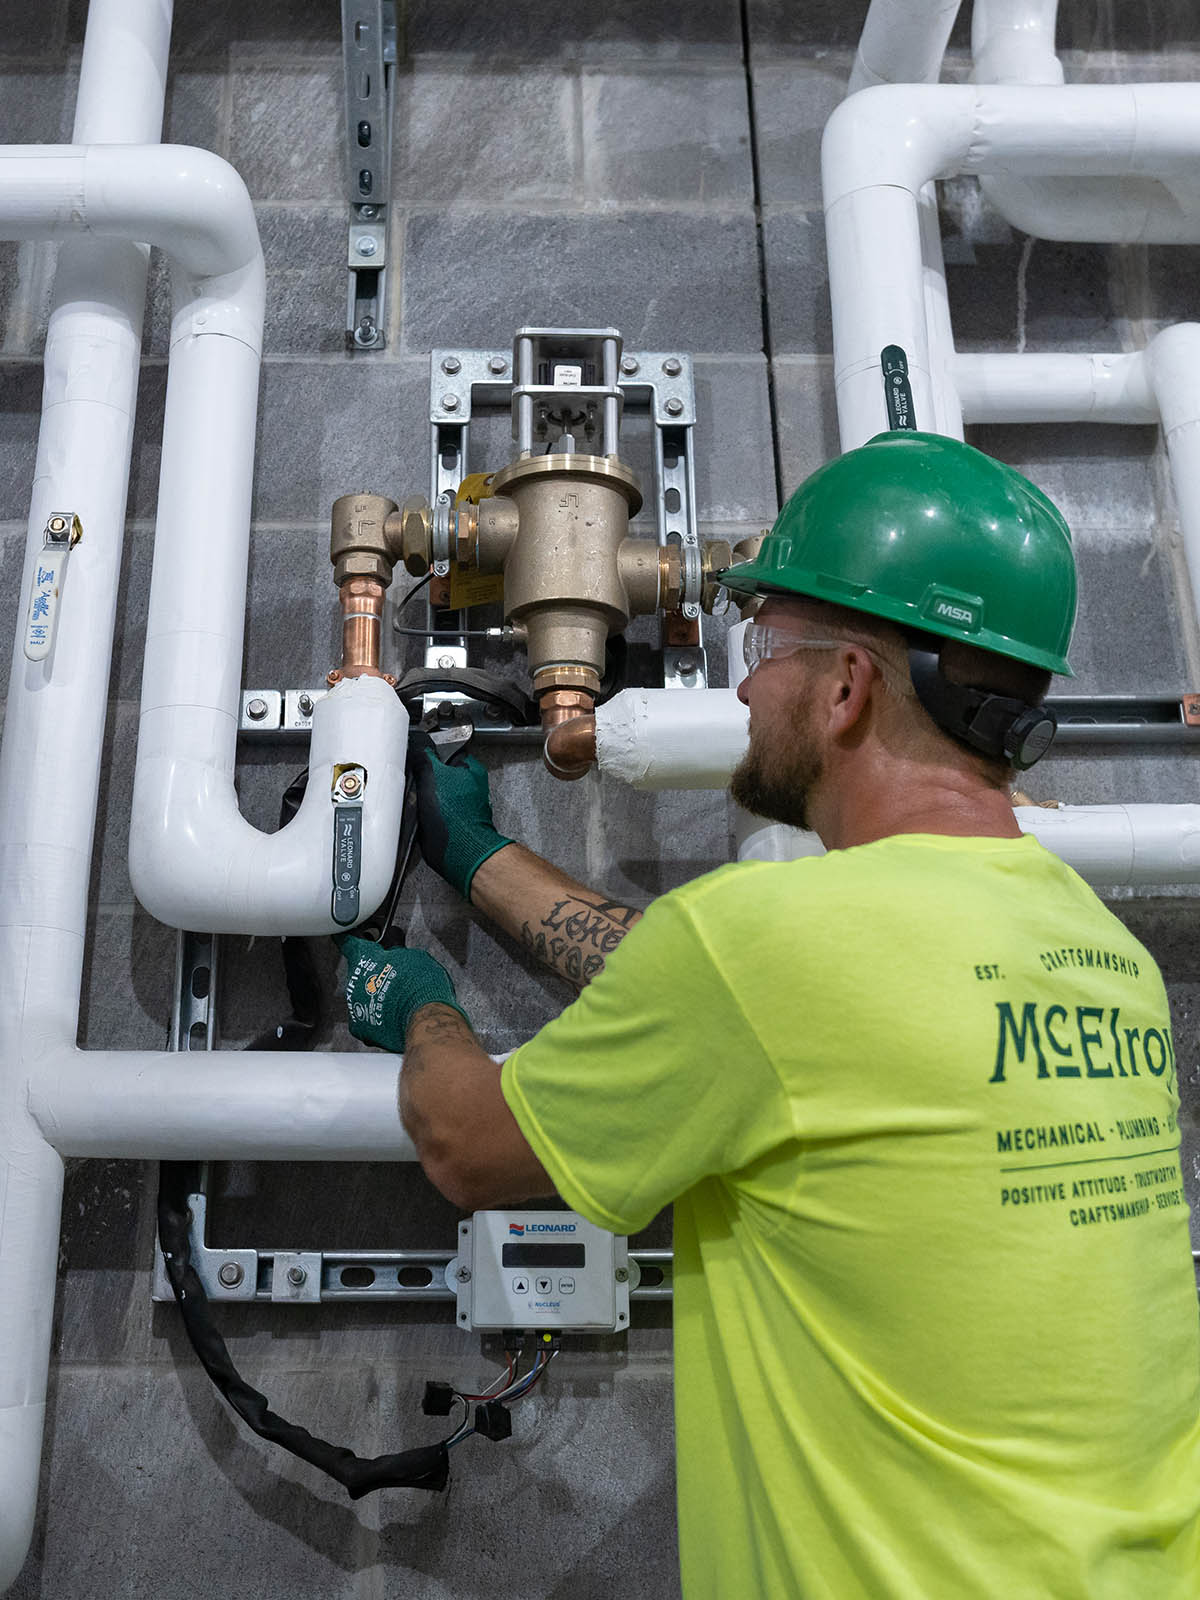 David Dwyer, McElroy’s plumbing/pipefitting foreman, leads construction of complex piping systems.